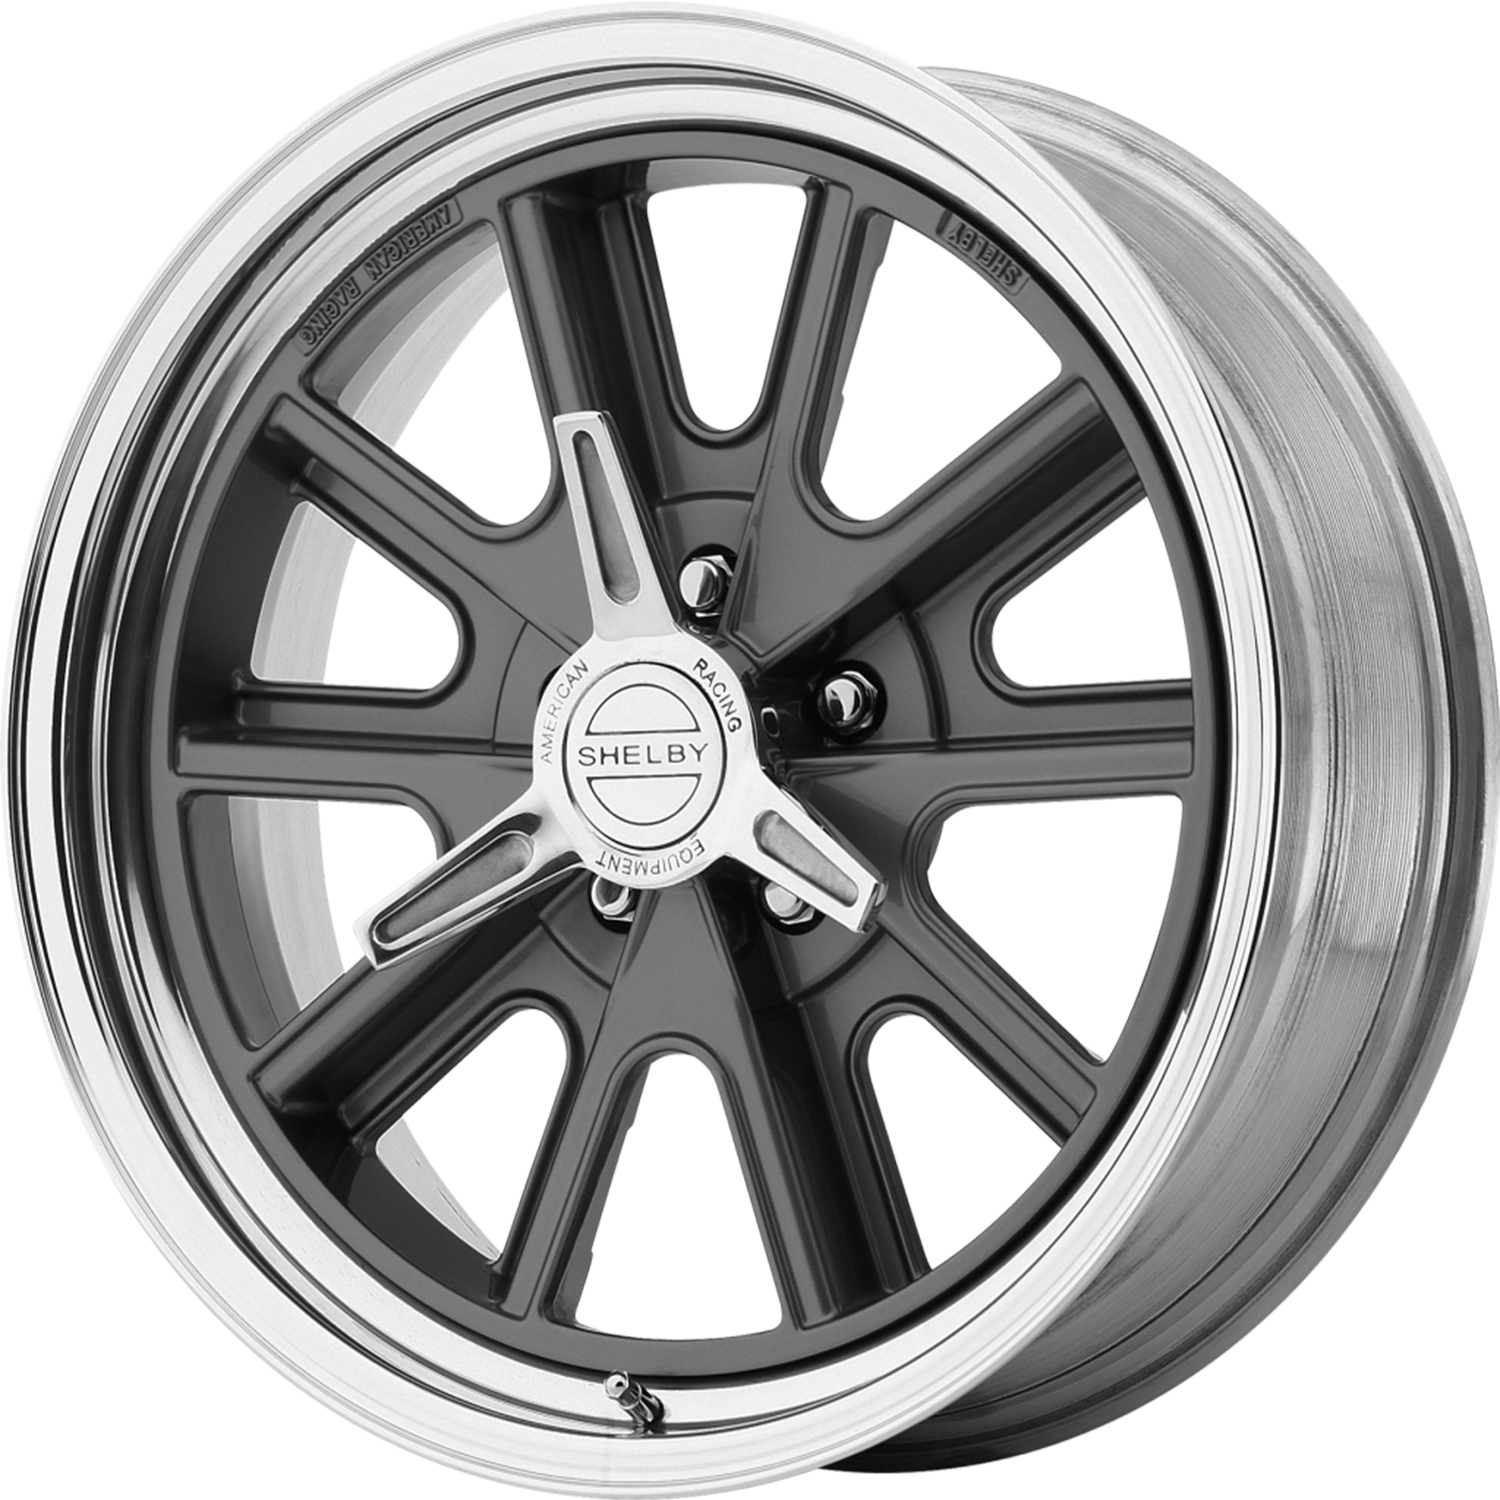 American Racing American 427 Shelby Cobra 15x7 5x114.3 -12et Two-Piece Mag Gray Polished Barrel 